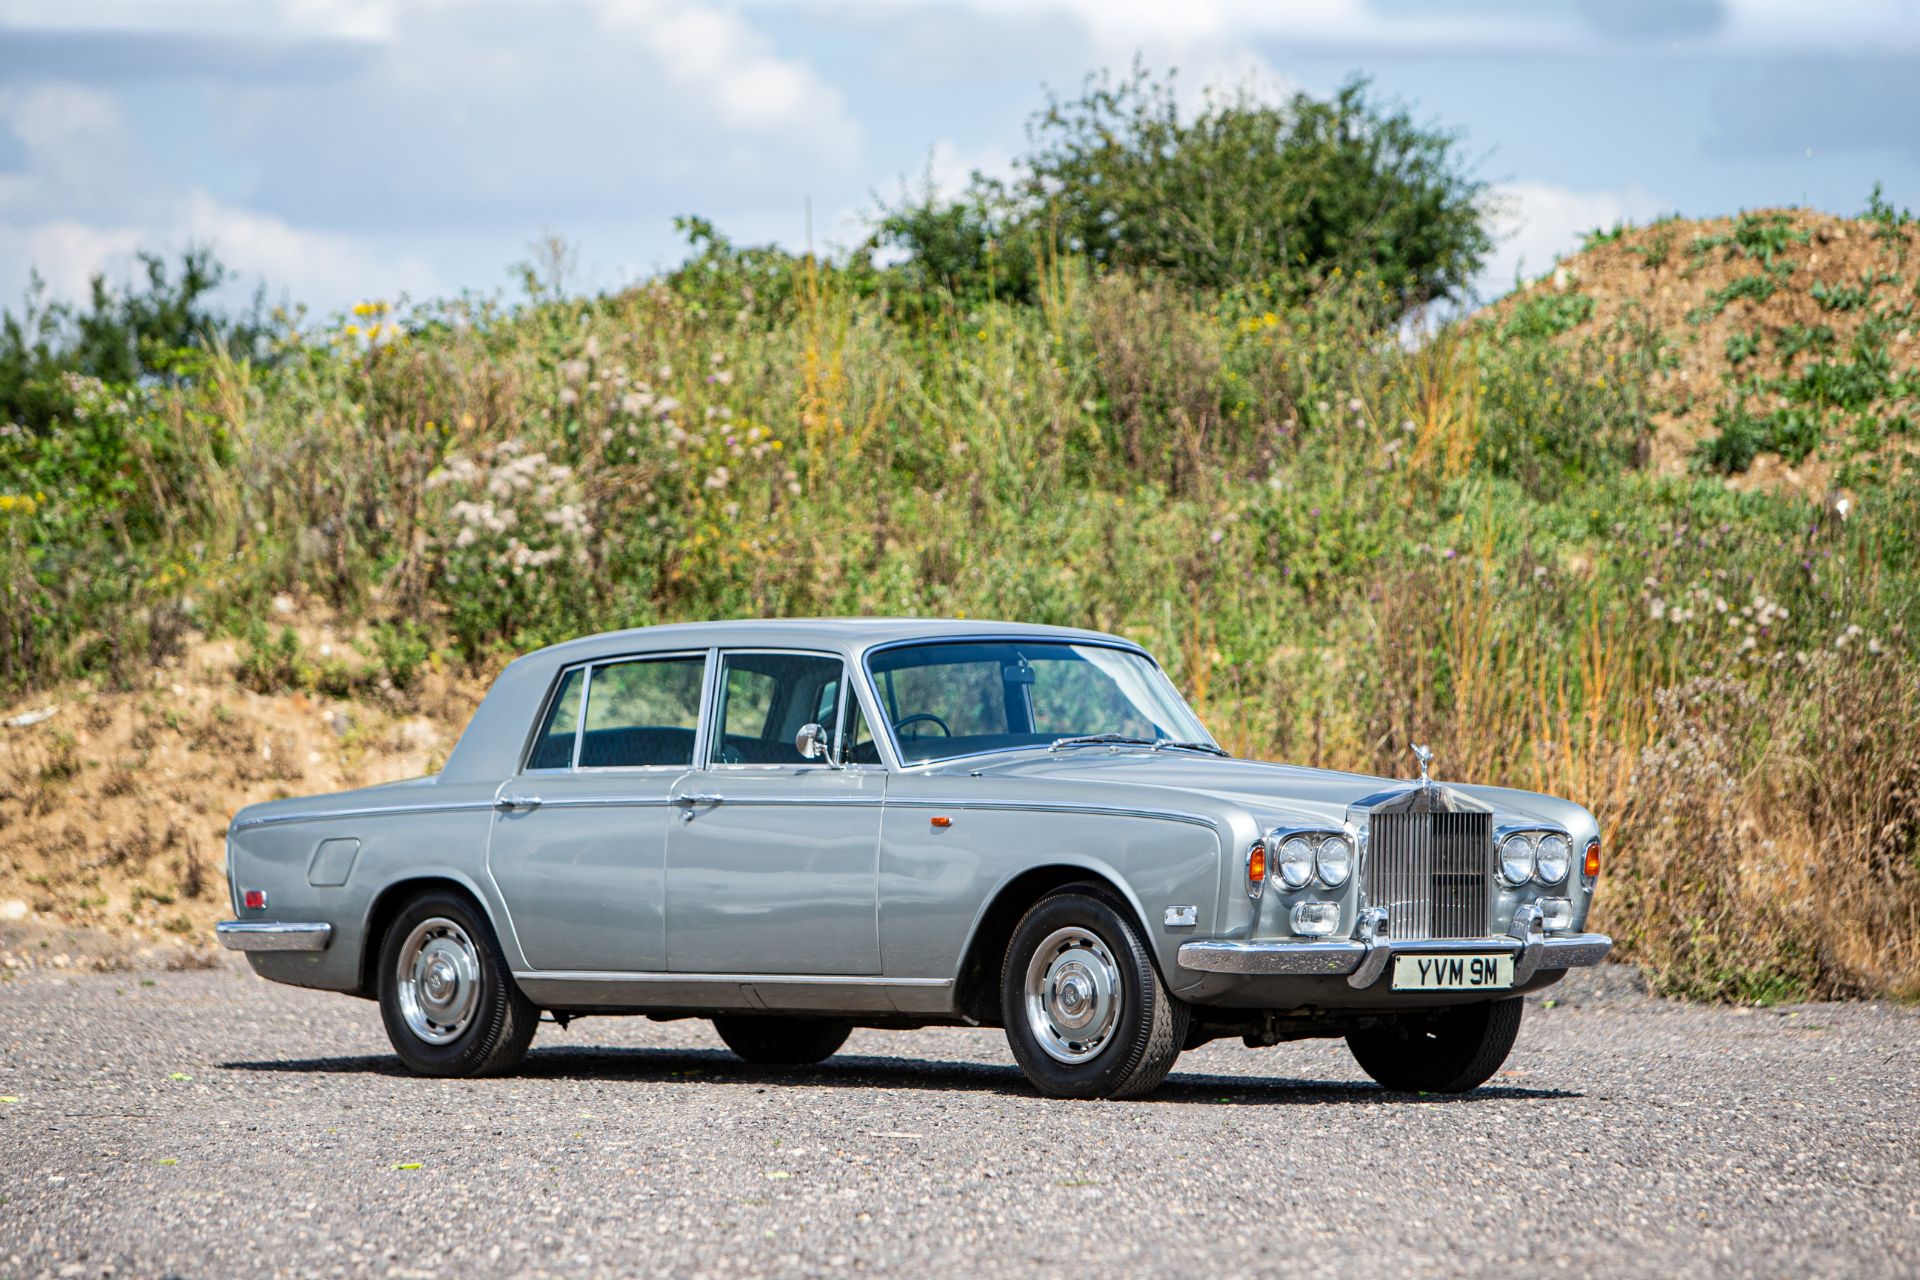 1973 Rolls-Royce Silver Shadow Saloon Chassis no. SRH 16589 - Image 2 of 2